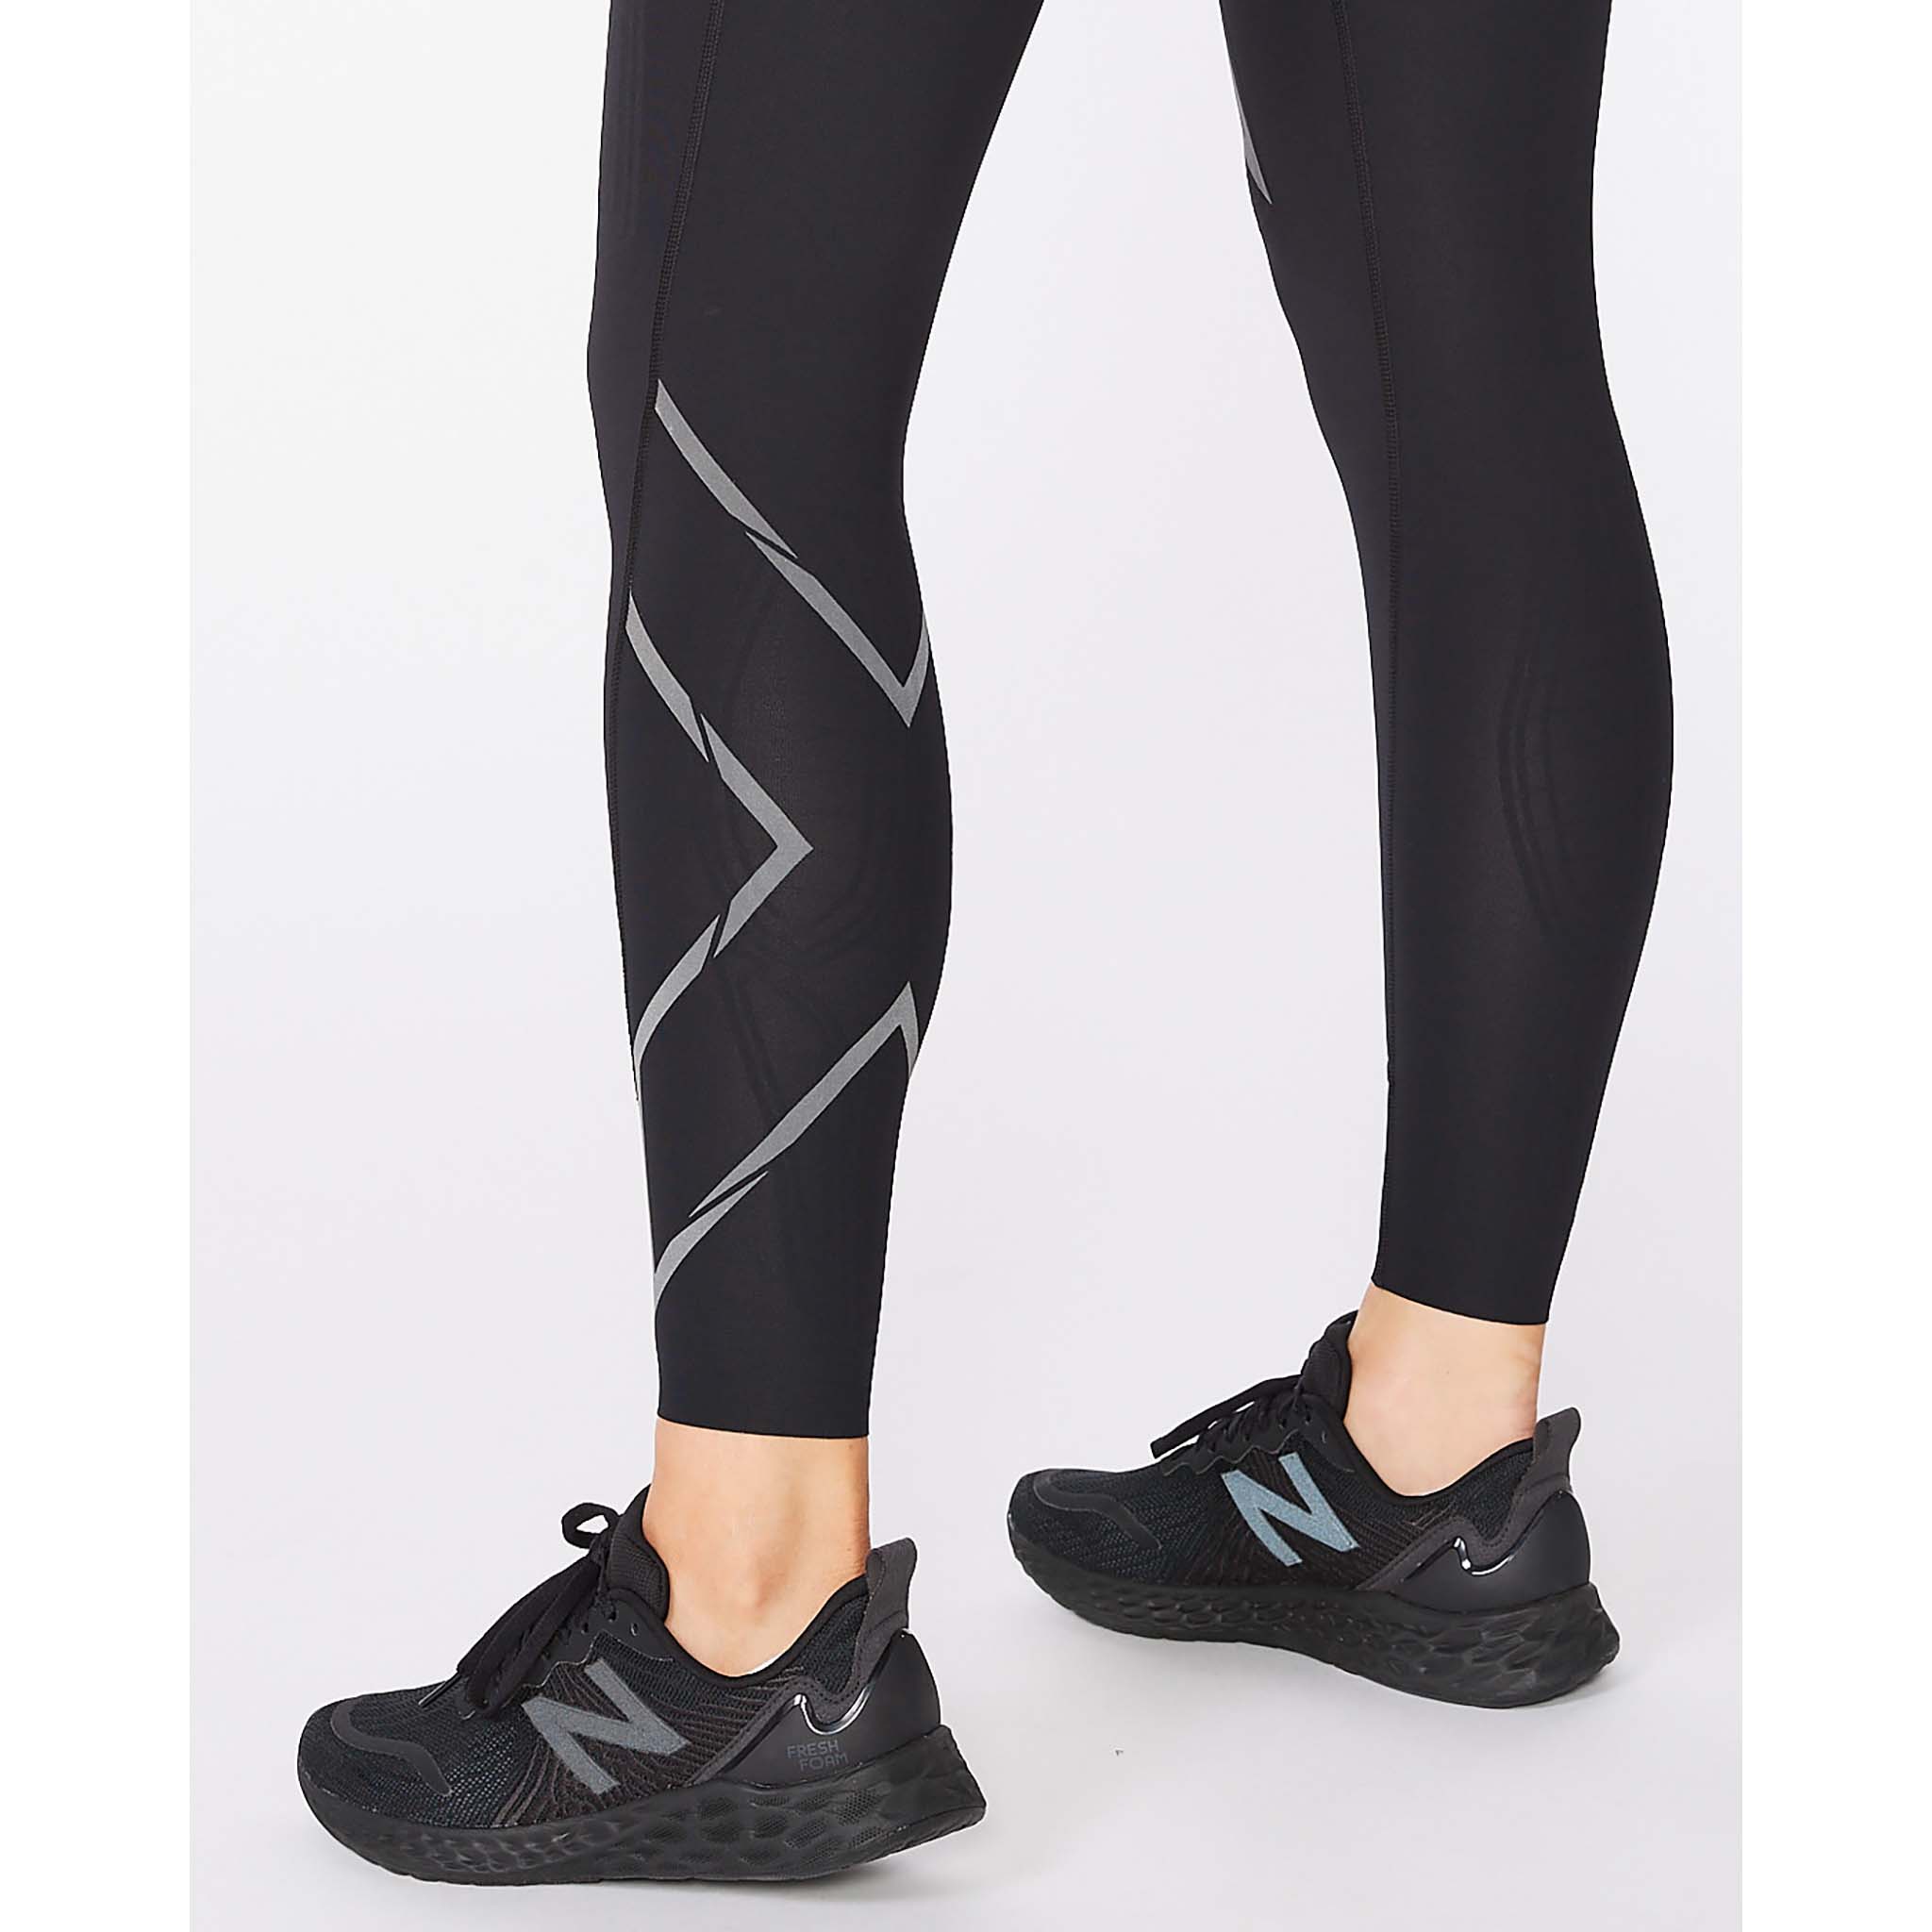 2XU Light Speed Mid-Rise Compression Tights for women - Soccer